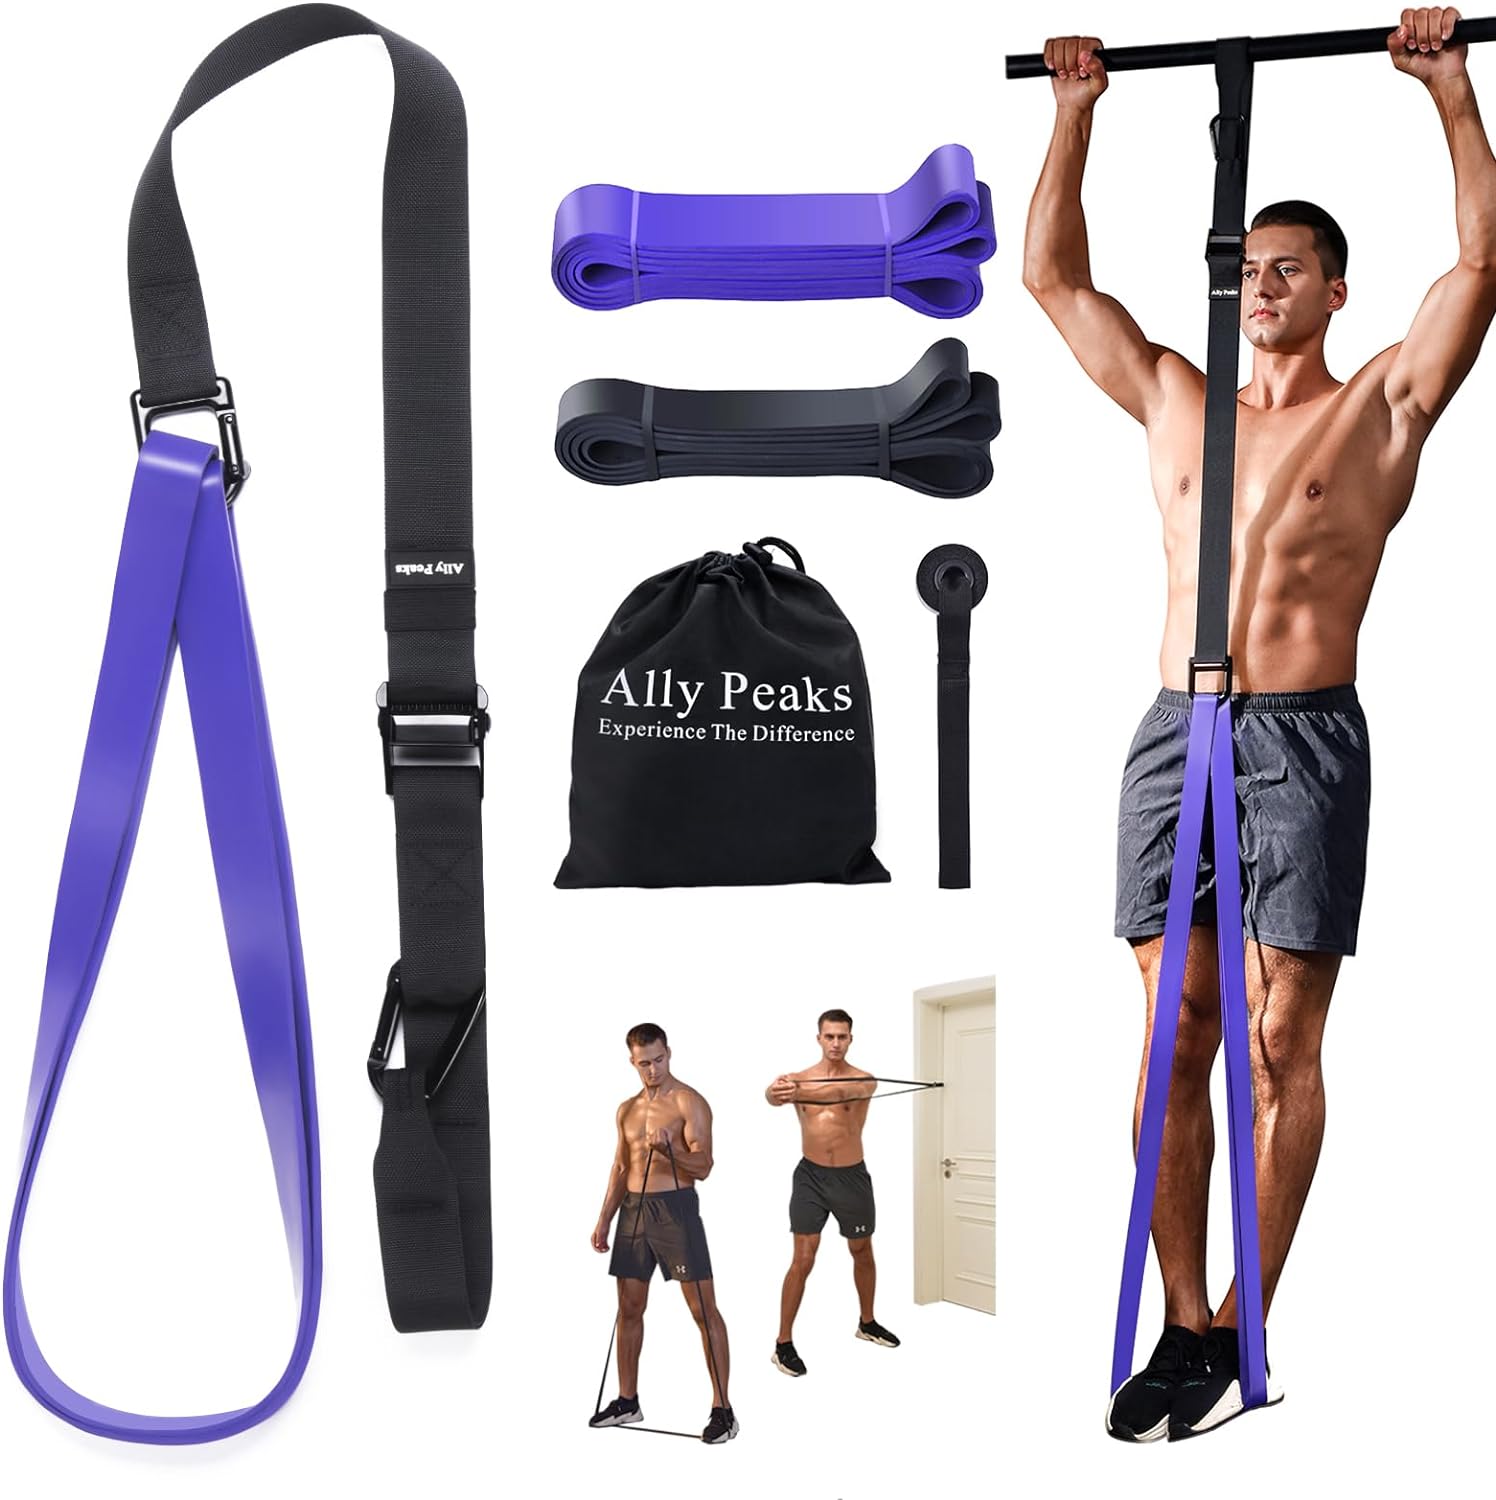 Ally Peaks Pull Up Assistance Bands,Up to 310 lbs Assistance, Adjustable and Replaceable Pull Up Assist Band,Heavy-Duty Assisted Pull Up Resistance Bands for Pull Up Assist Push Up Assist,US Patent